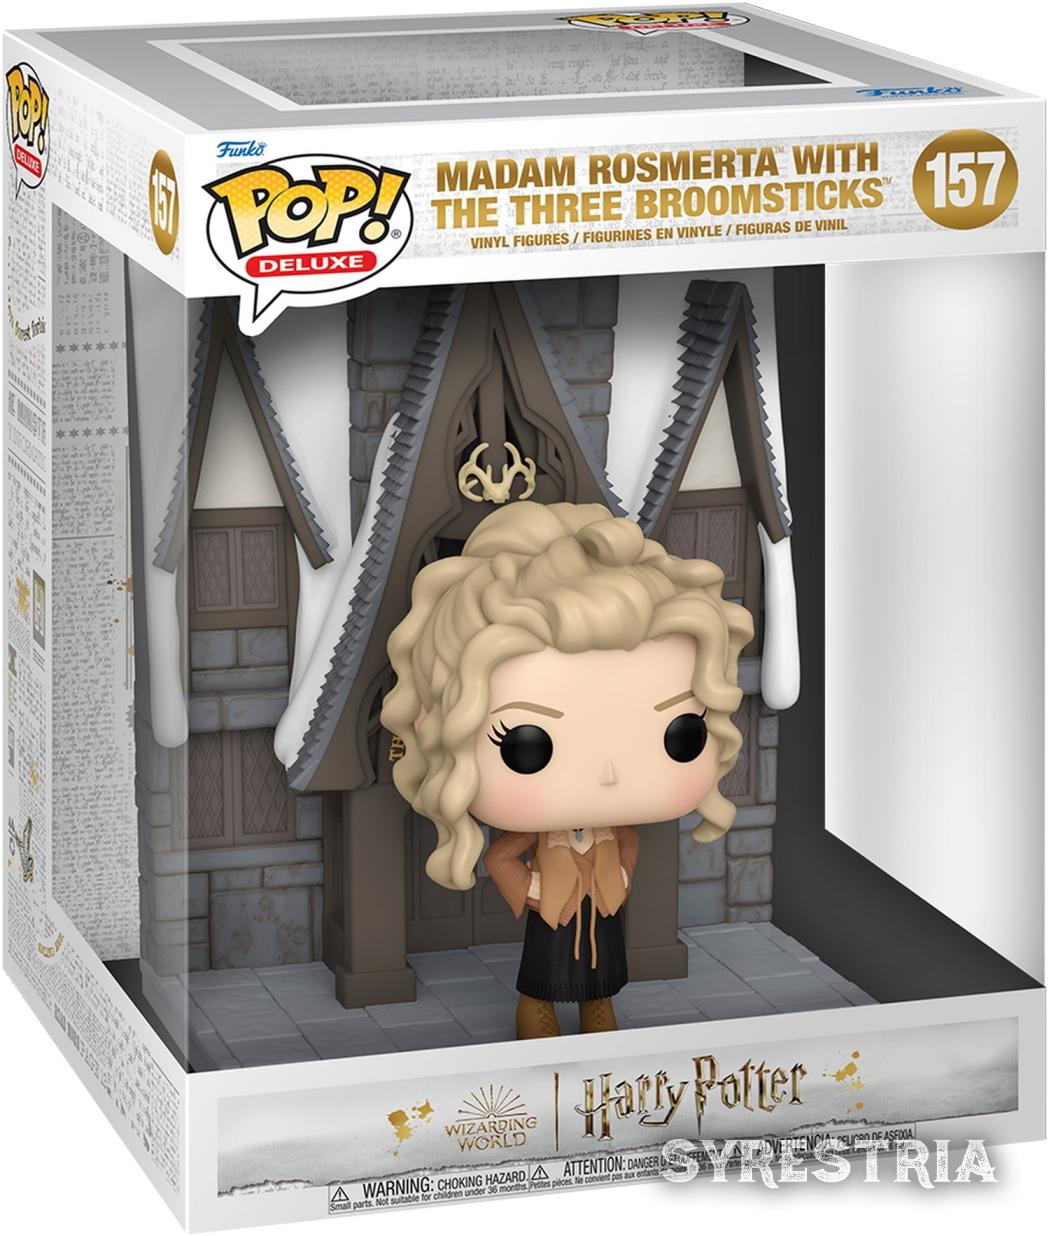 Harry Potter - Madam Rosmerta With The Three Broomstick 157 - Funko Pop! Deluxe